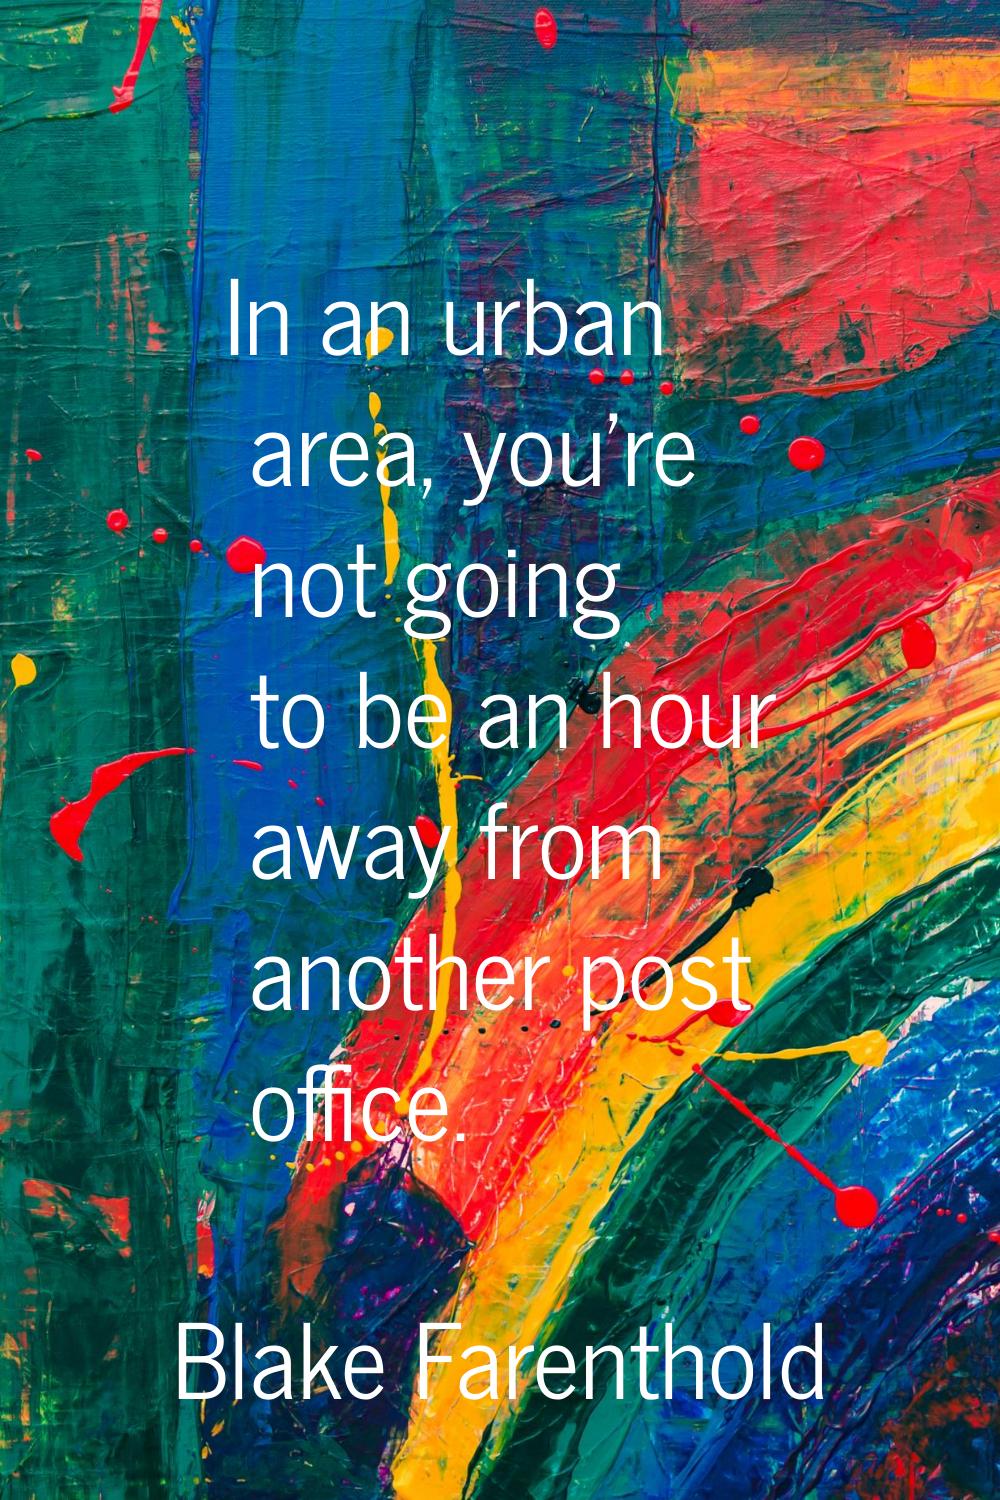 In an urban area, you're not going to be an hour away from another post office.